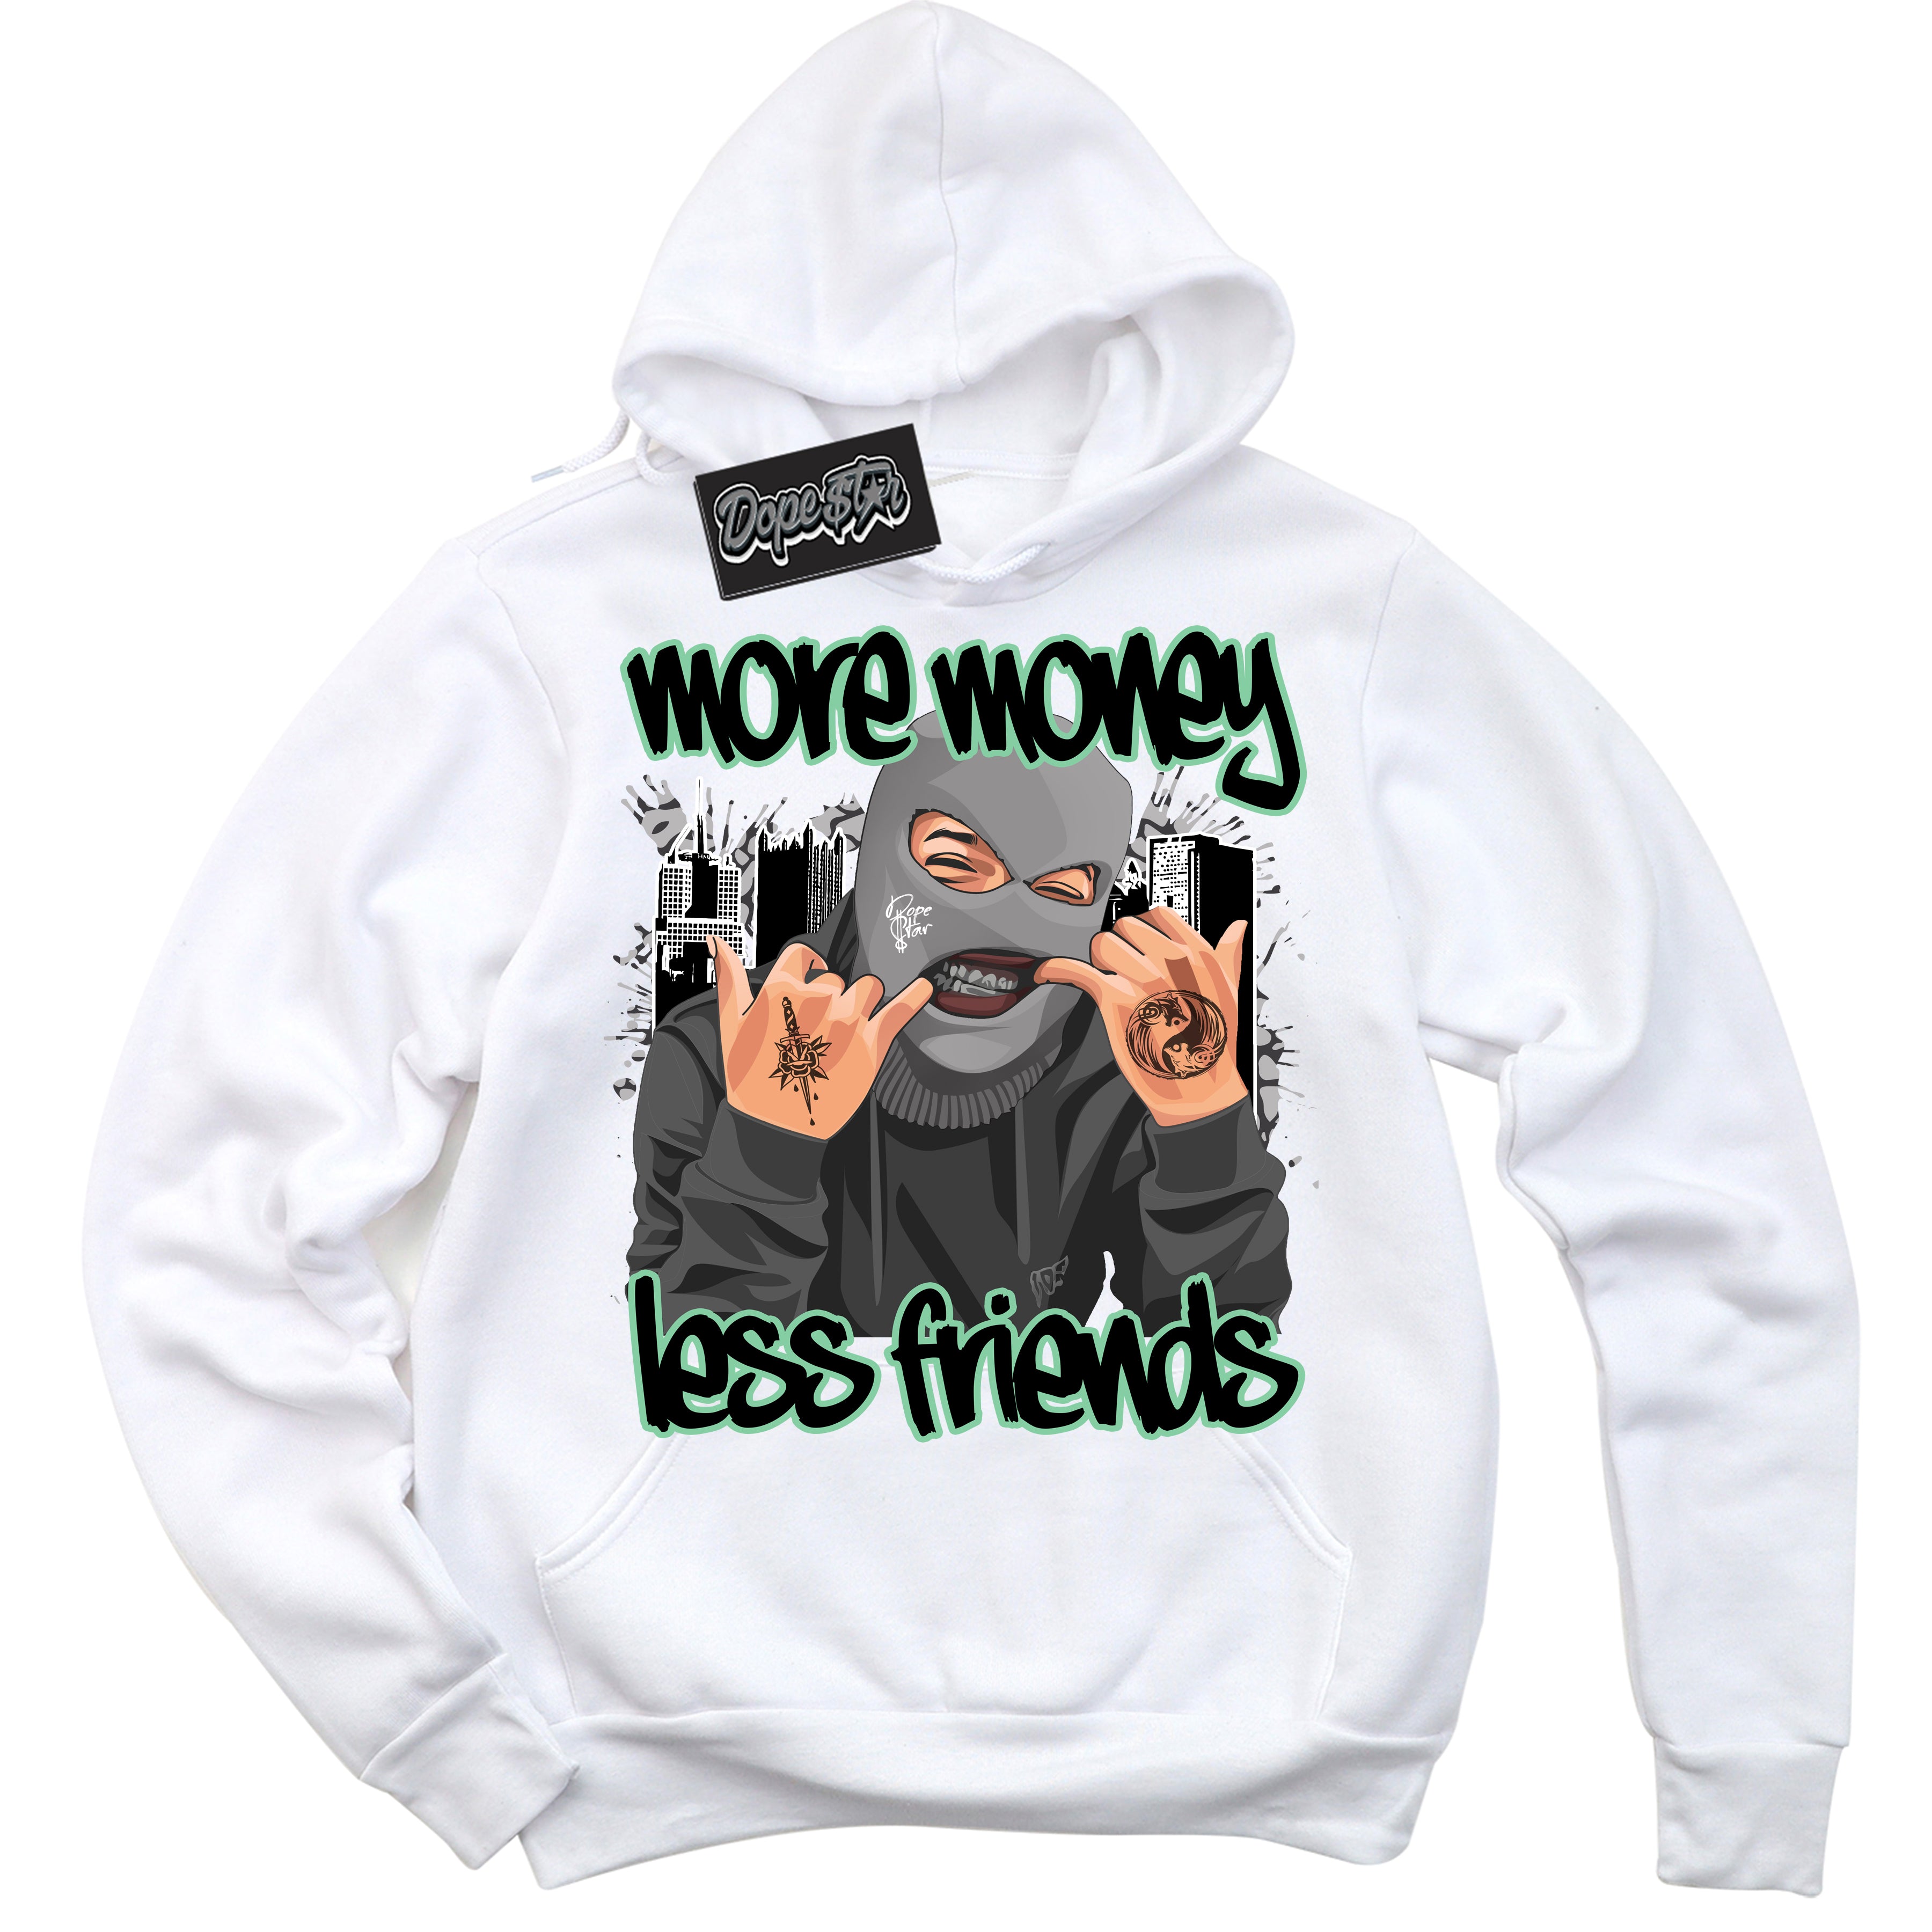 Cool White Graphic DopeStar Hoodie with “ More Money Less Friends “ print, that perfectly matches Green Glow 3s sneakers